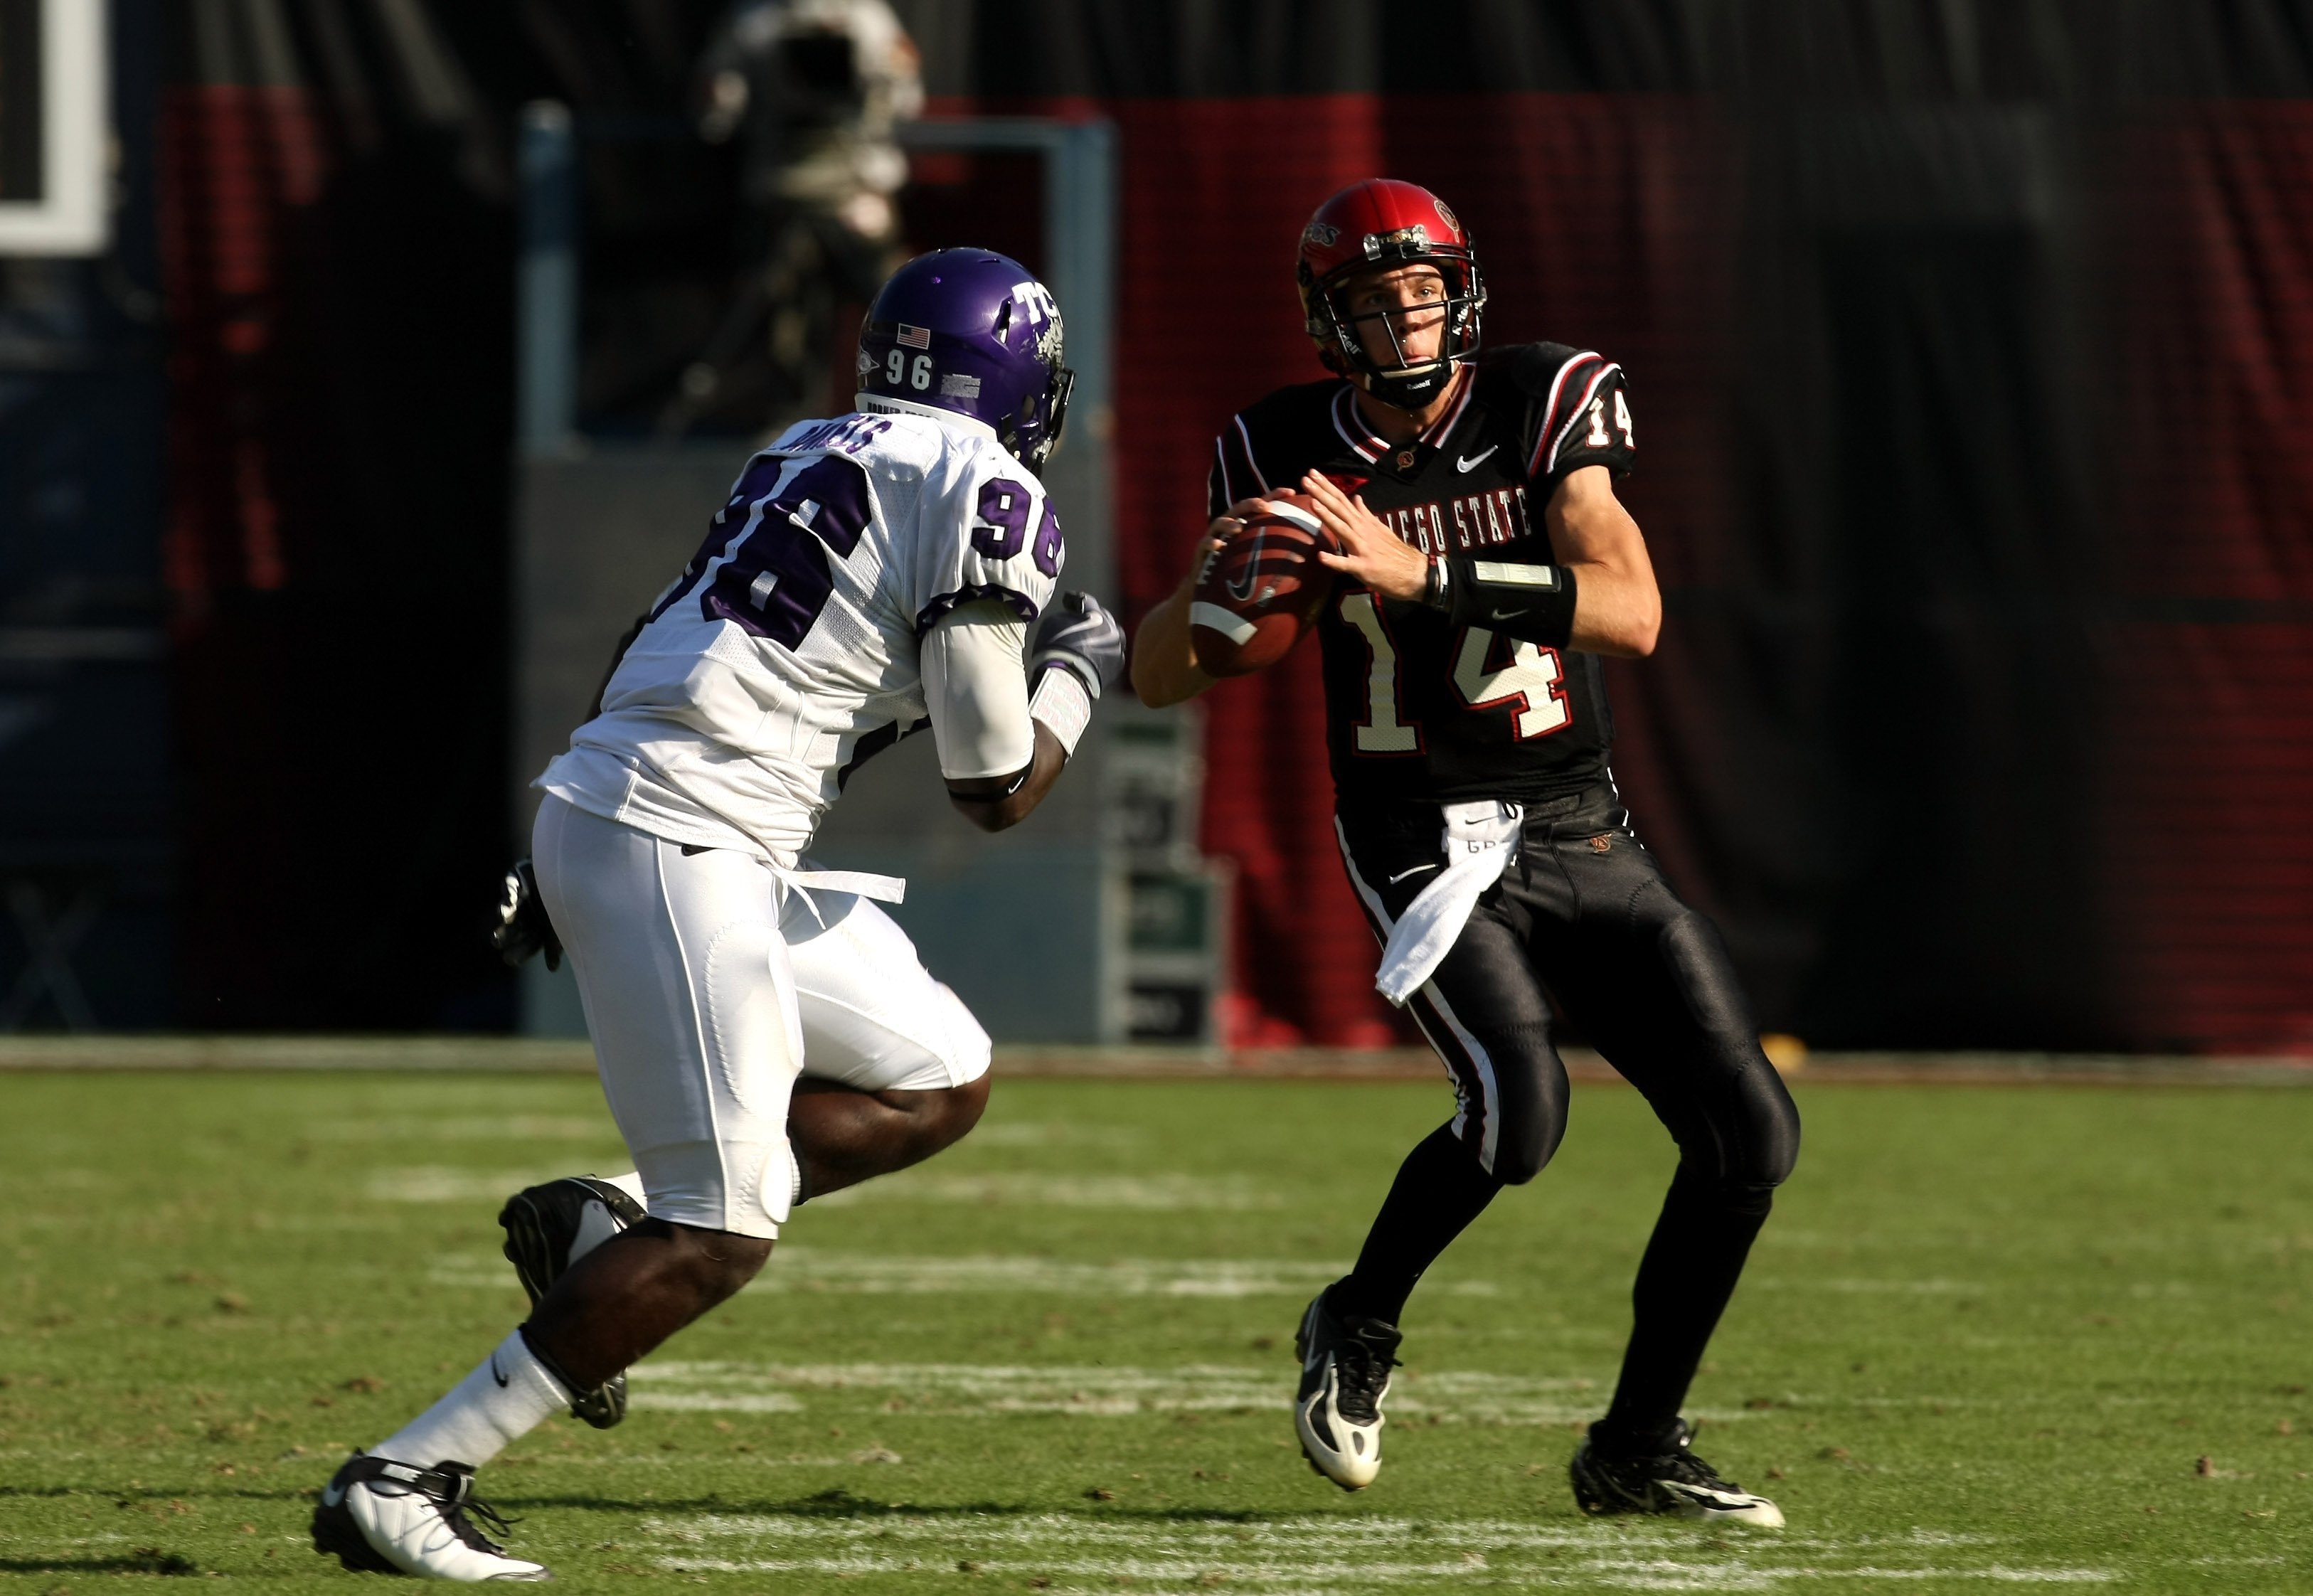 SAN DIEGO - NOVEMBER 07:  Quarterback Ryan Lindley #14 of the San Diego State Aztecs throws a pass against defensive end Wayne Daniels #96 of the Texas Christian University Horned Frogs on November 7, 2009 at Qualcomm Stadium in San Diego, California.  TC